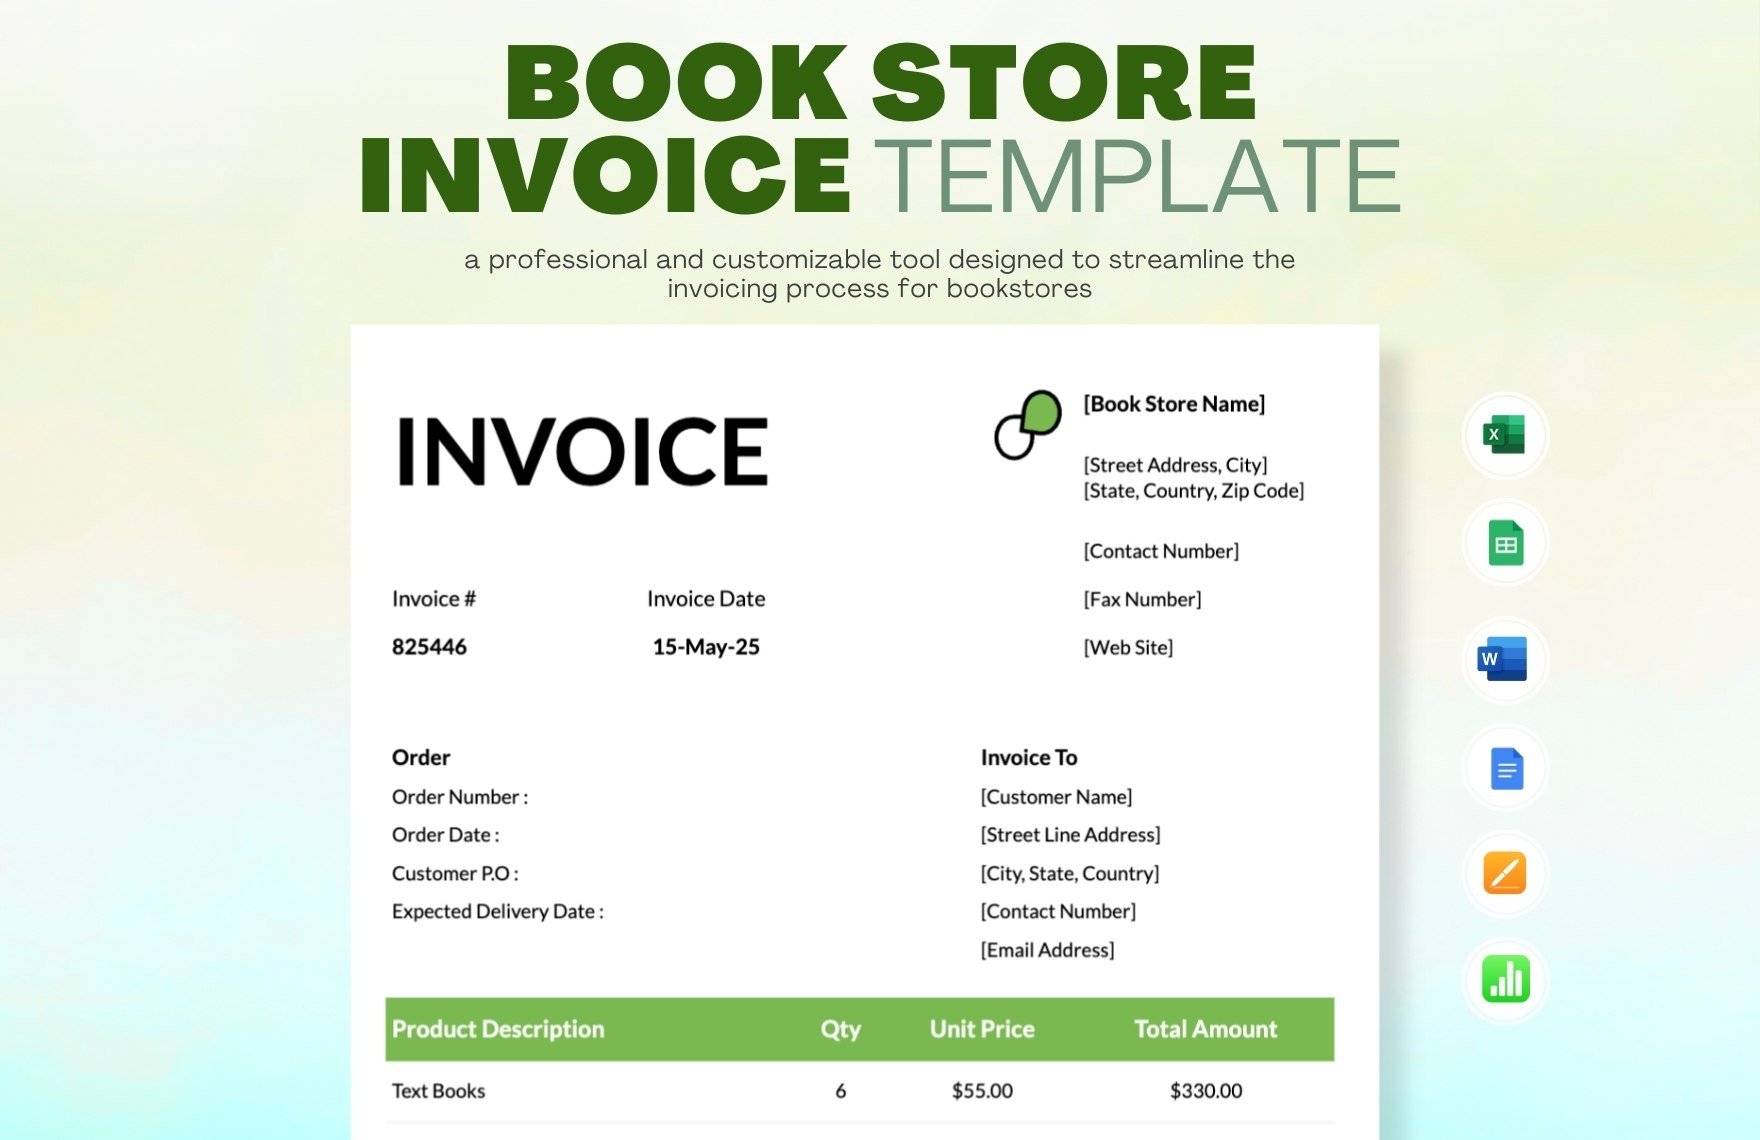 Book Store Invoice Template in Word, Google Docs, Excel, PDF, Google Sheets, Apple Pages, Apple Numbers